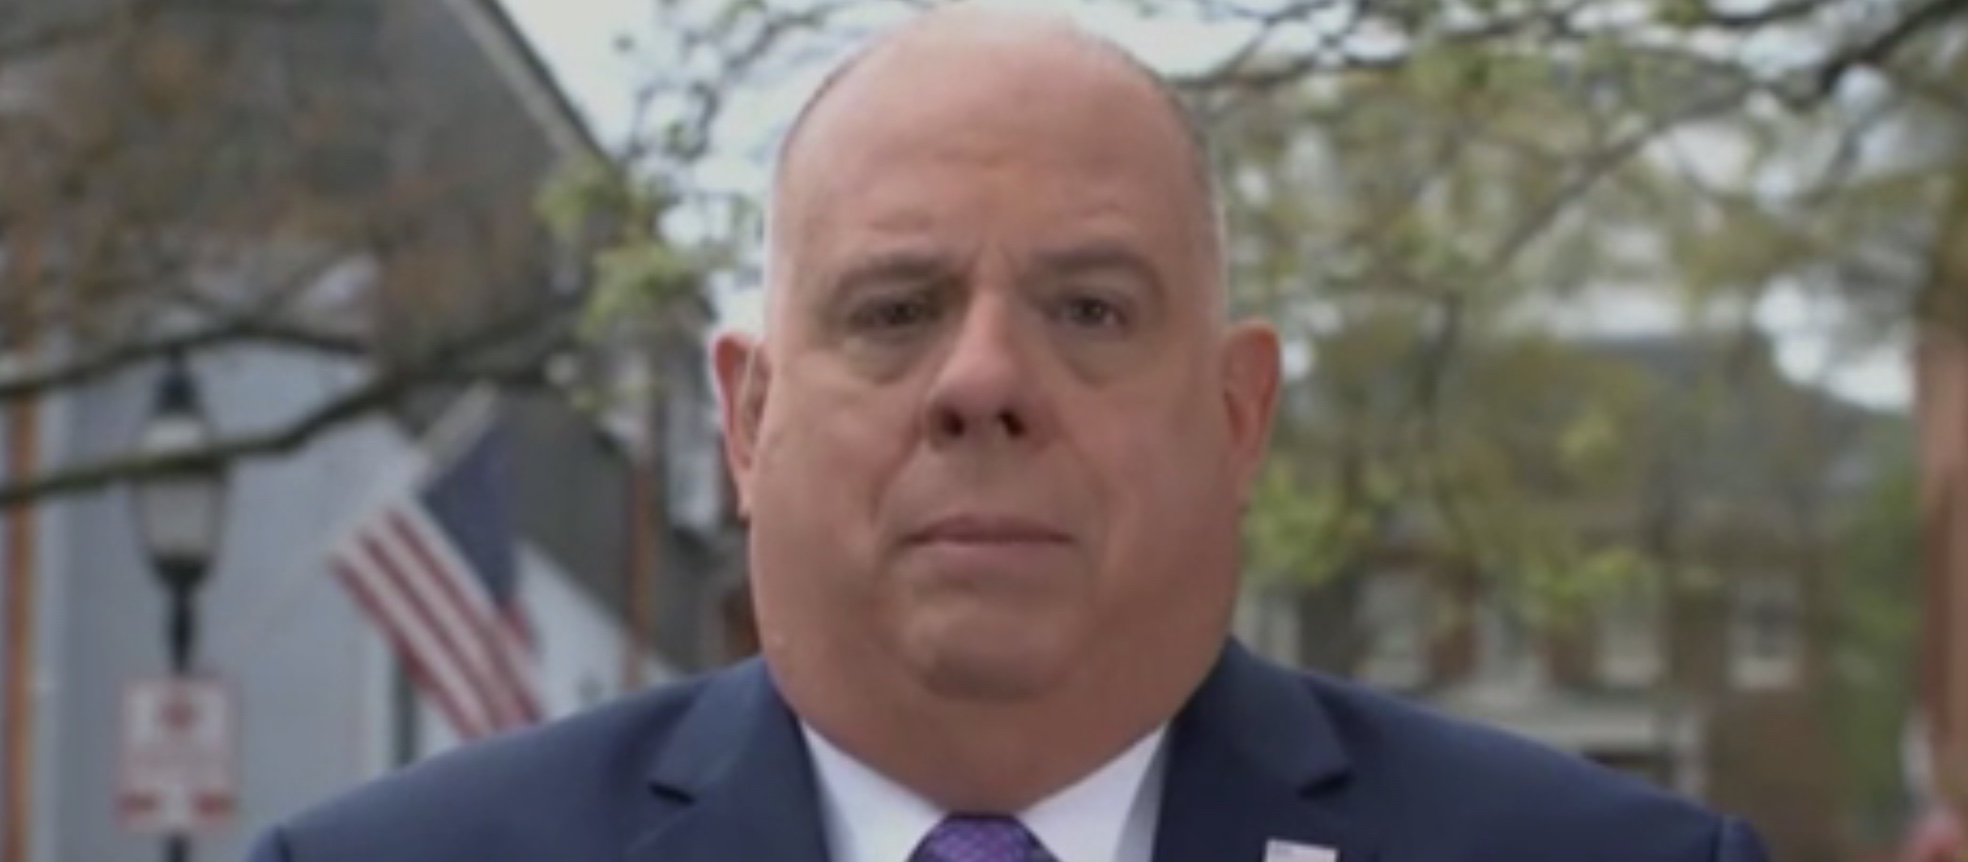 Republican Maryland Gov. Larry Hogan discusses the timeline for reopening the US economy amid the coronavirus pandemic on “This Week,” Apr. 12, 2020. ABC News screenshot